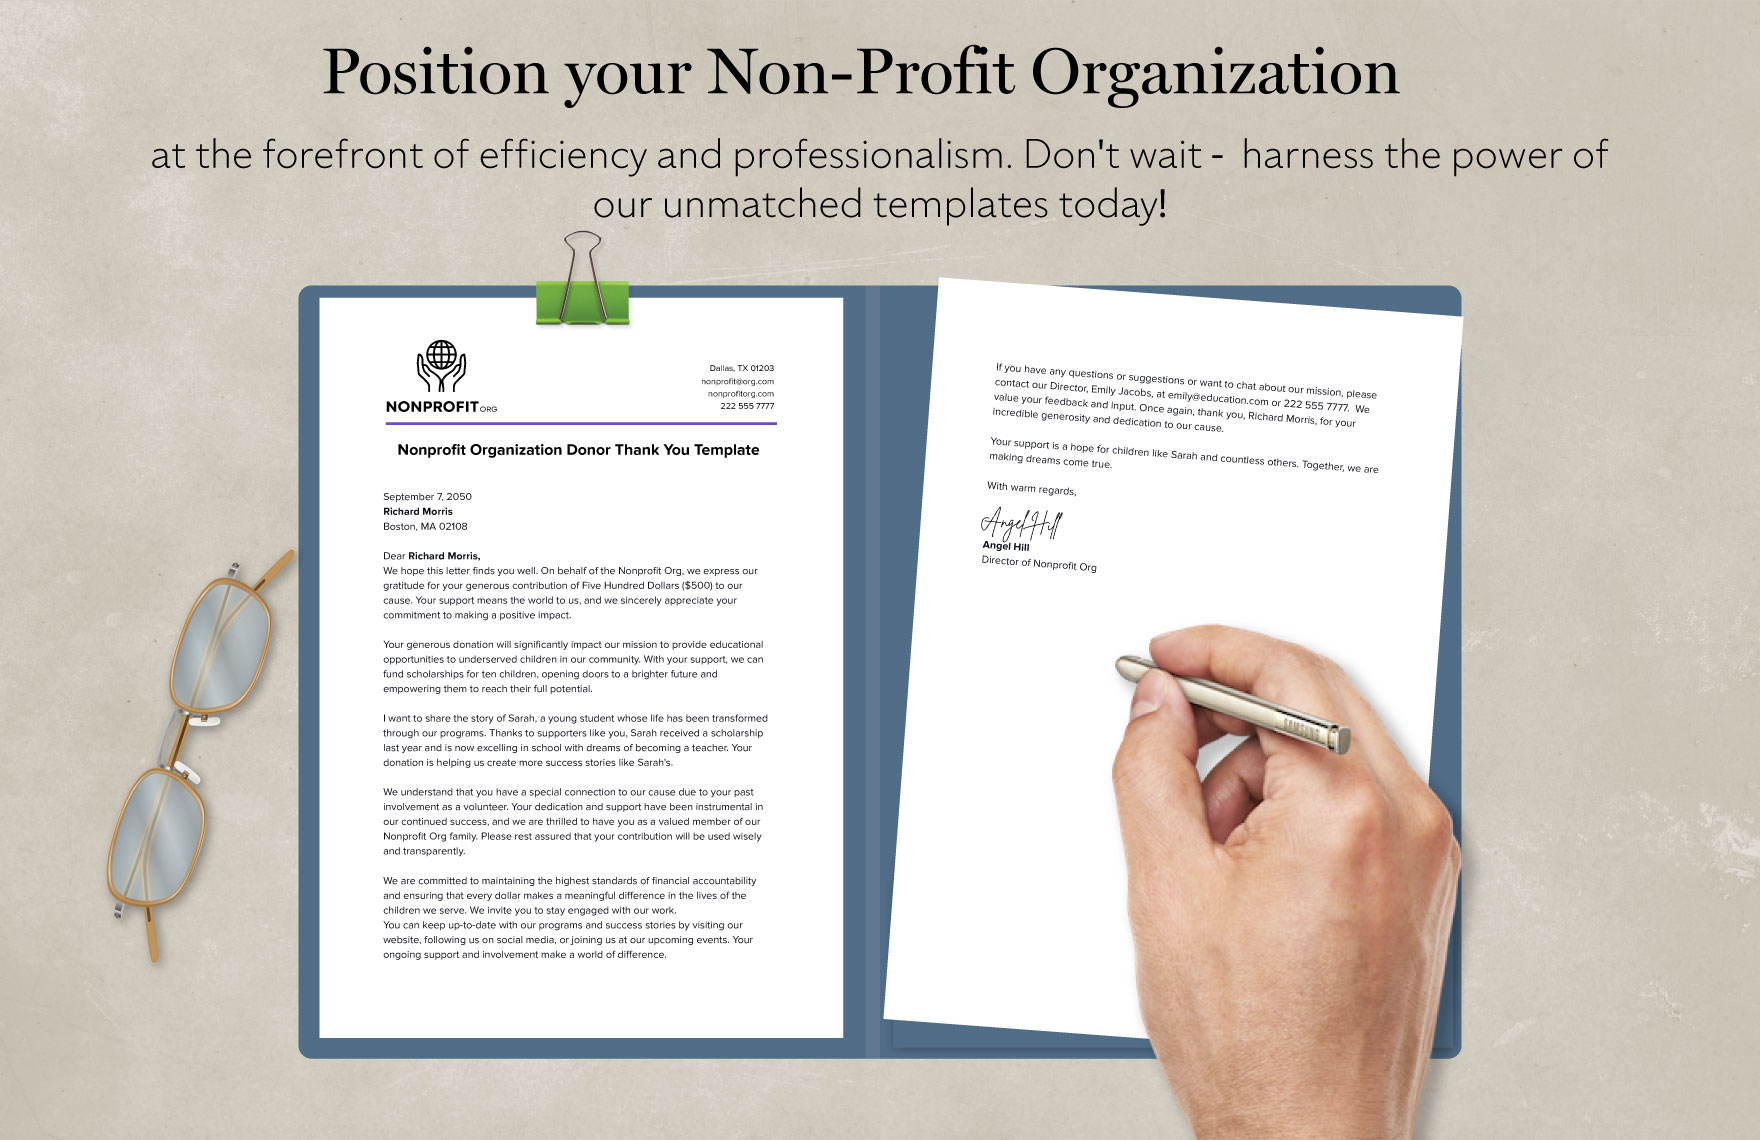 Nonprofit Organization Donor Thank You Template